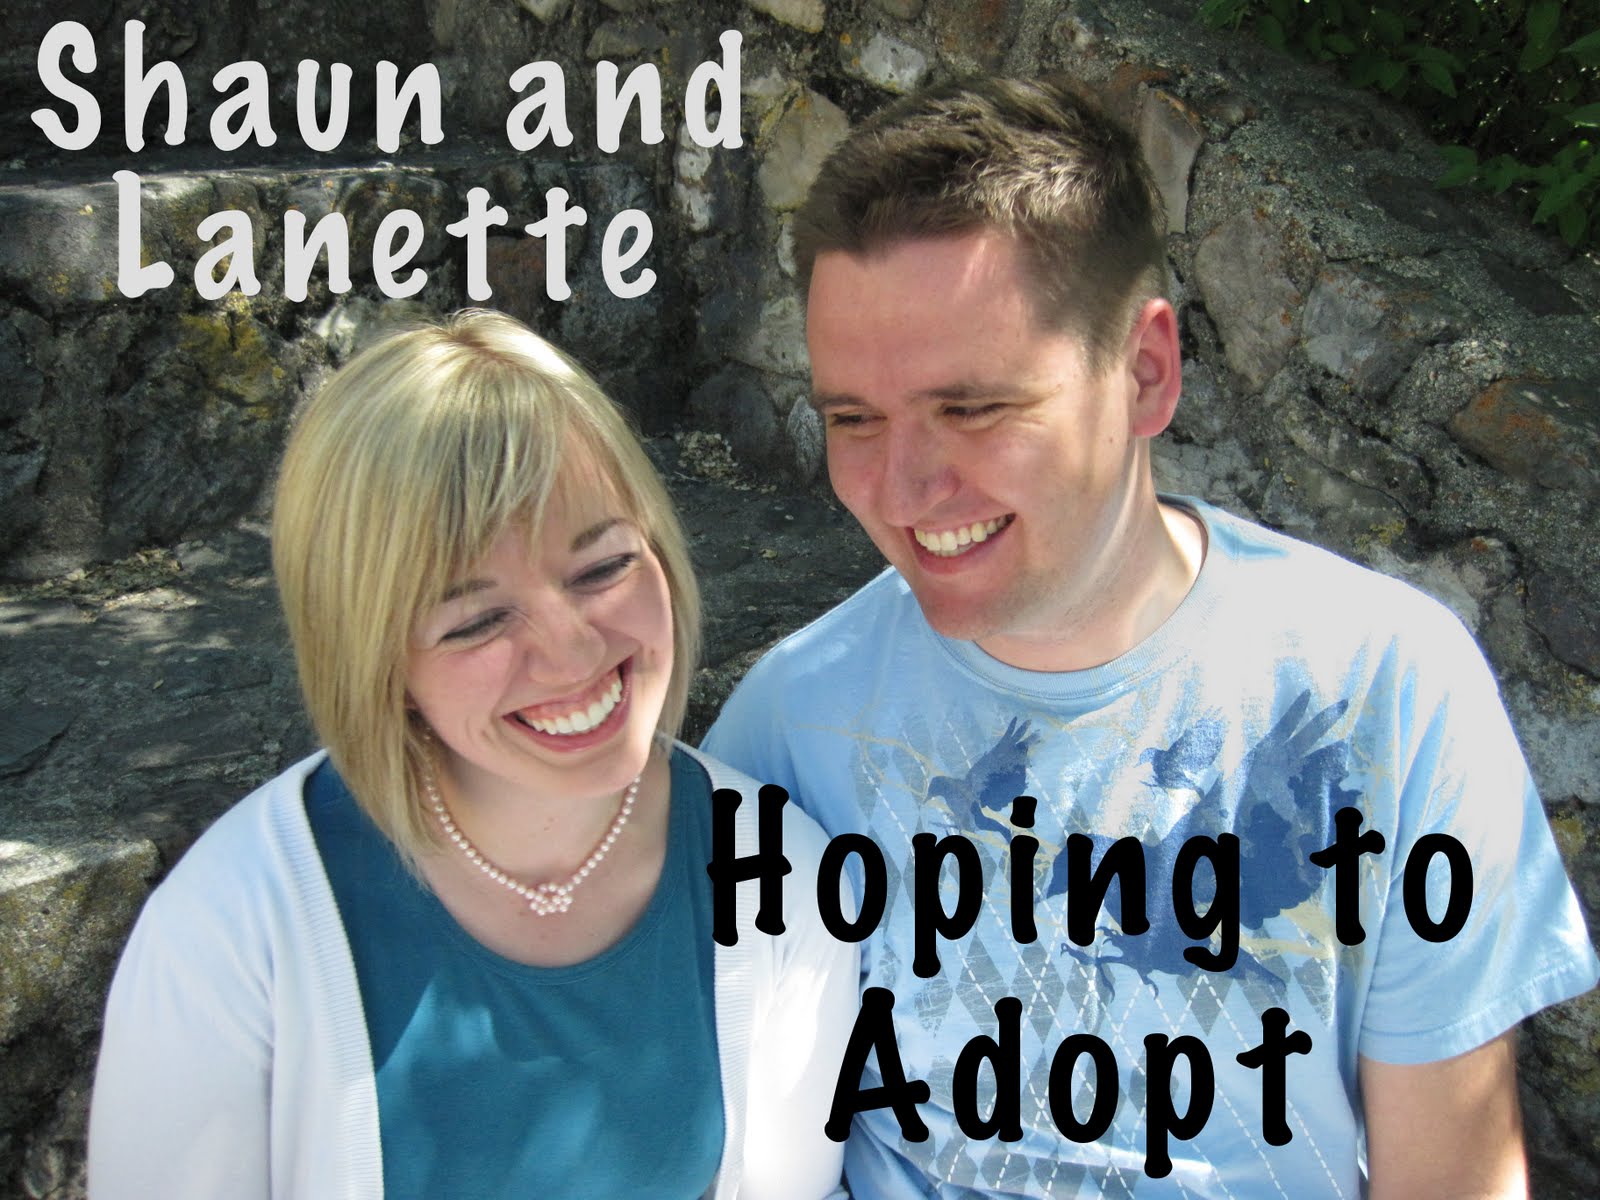 We are hoping to adopt!